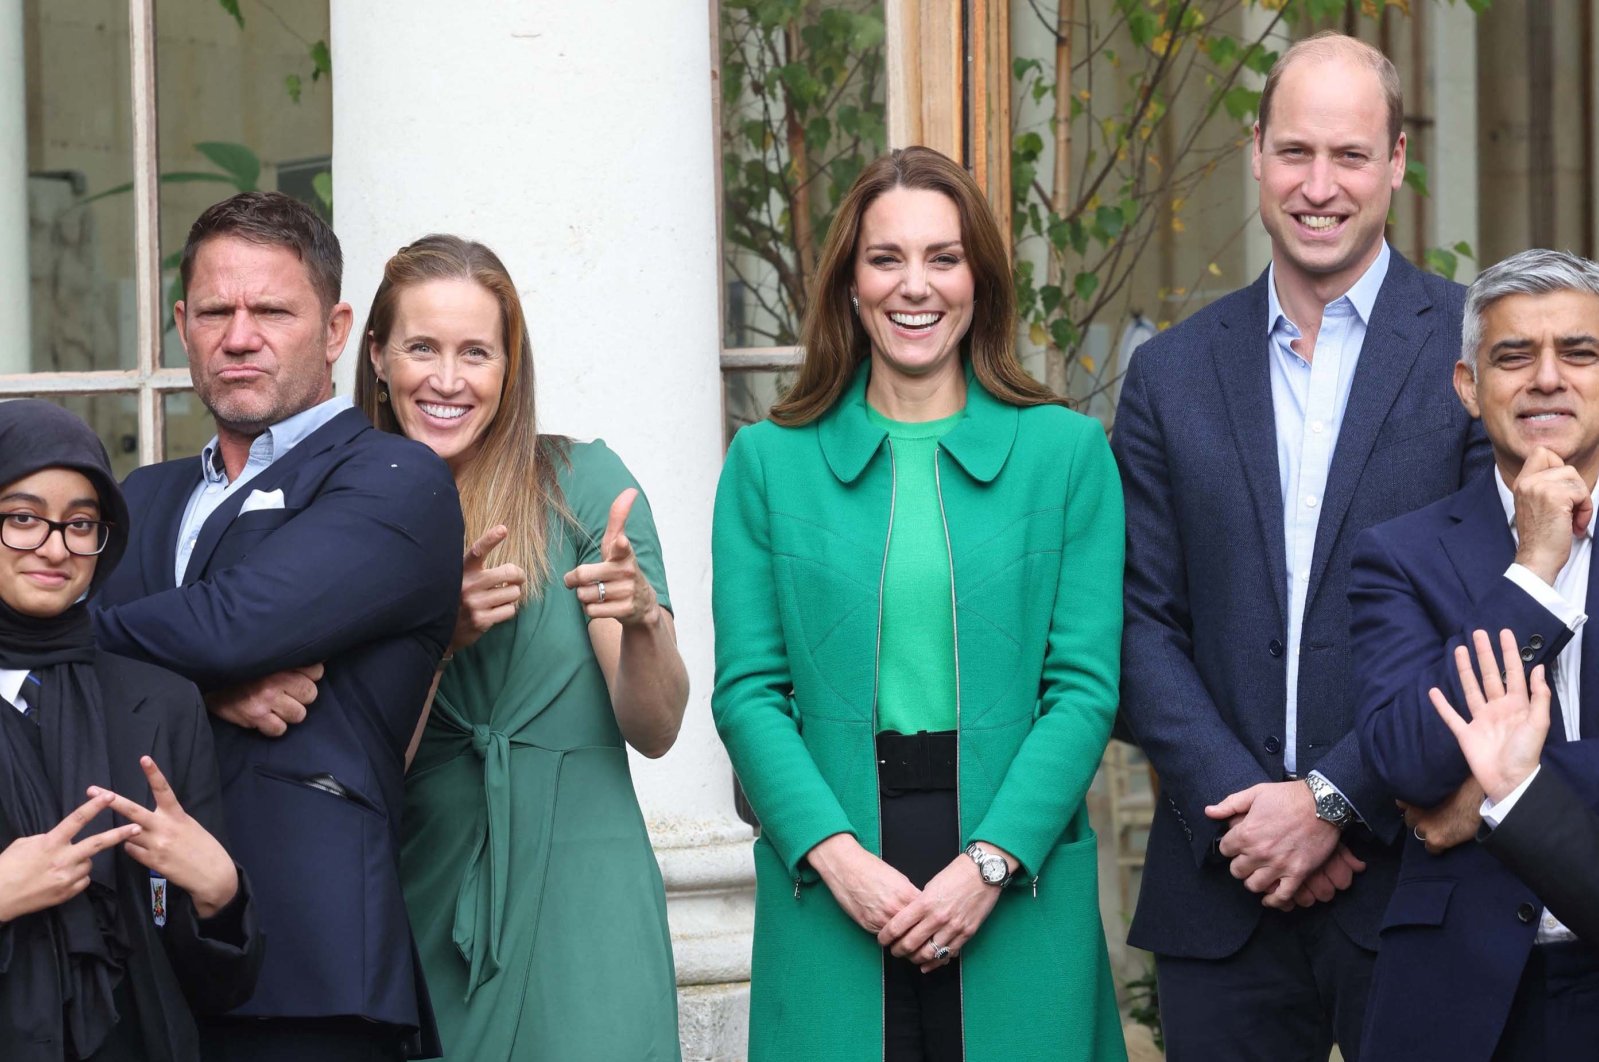 Britain's Prince William, Duke of Cambridge (2R) and Britain's Catherine, Duchess of Cambridge (3R) pose with London Mayor Sadiq Khan (R), naturalist Steve Backshall (2L) and Olympian rower Helen Glover (3L) during their visit to take part in a Generation Earthshot educational initiative comprising of activities designed to generate ideas to repair the planet and spark enthusiasm for the natural world, at Kew Gardens, London, U.K., Oct. 13, 2021. (Pool via AFP)